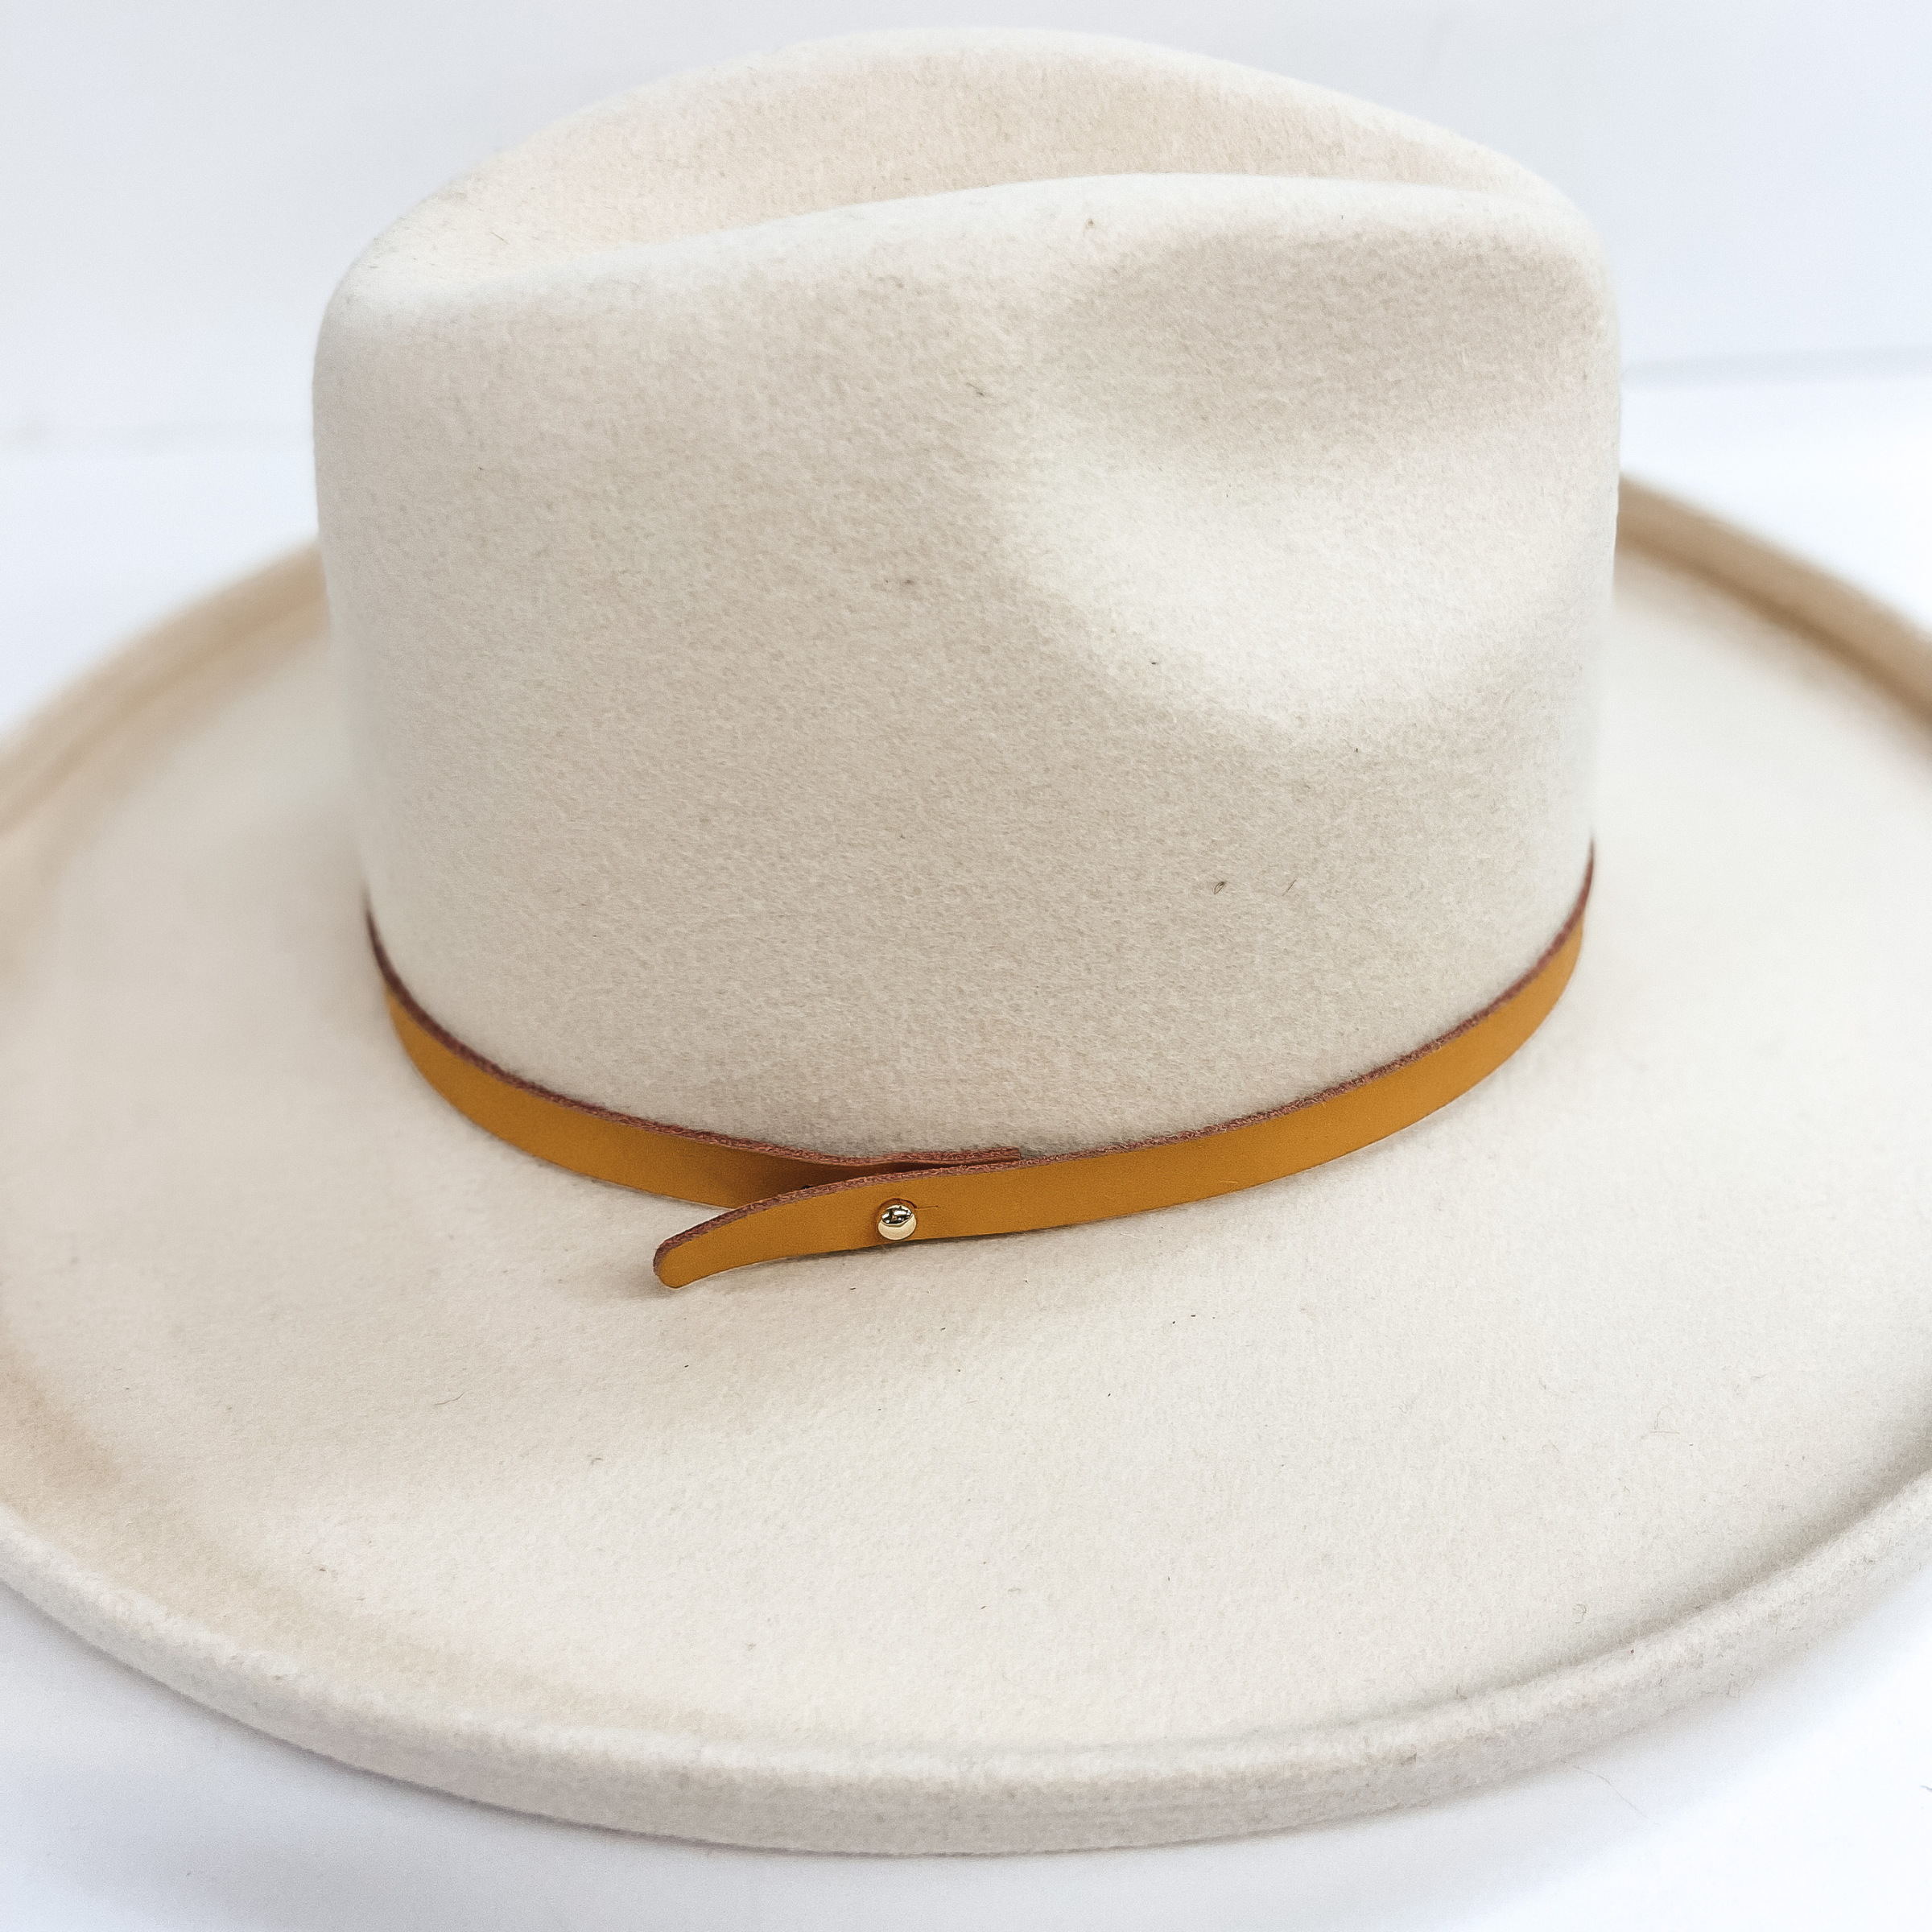 A camel brown thin leather hatband that has a gold pin. Pictured on an ivory felt hat.